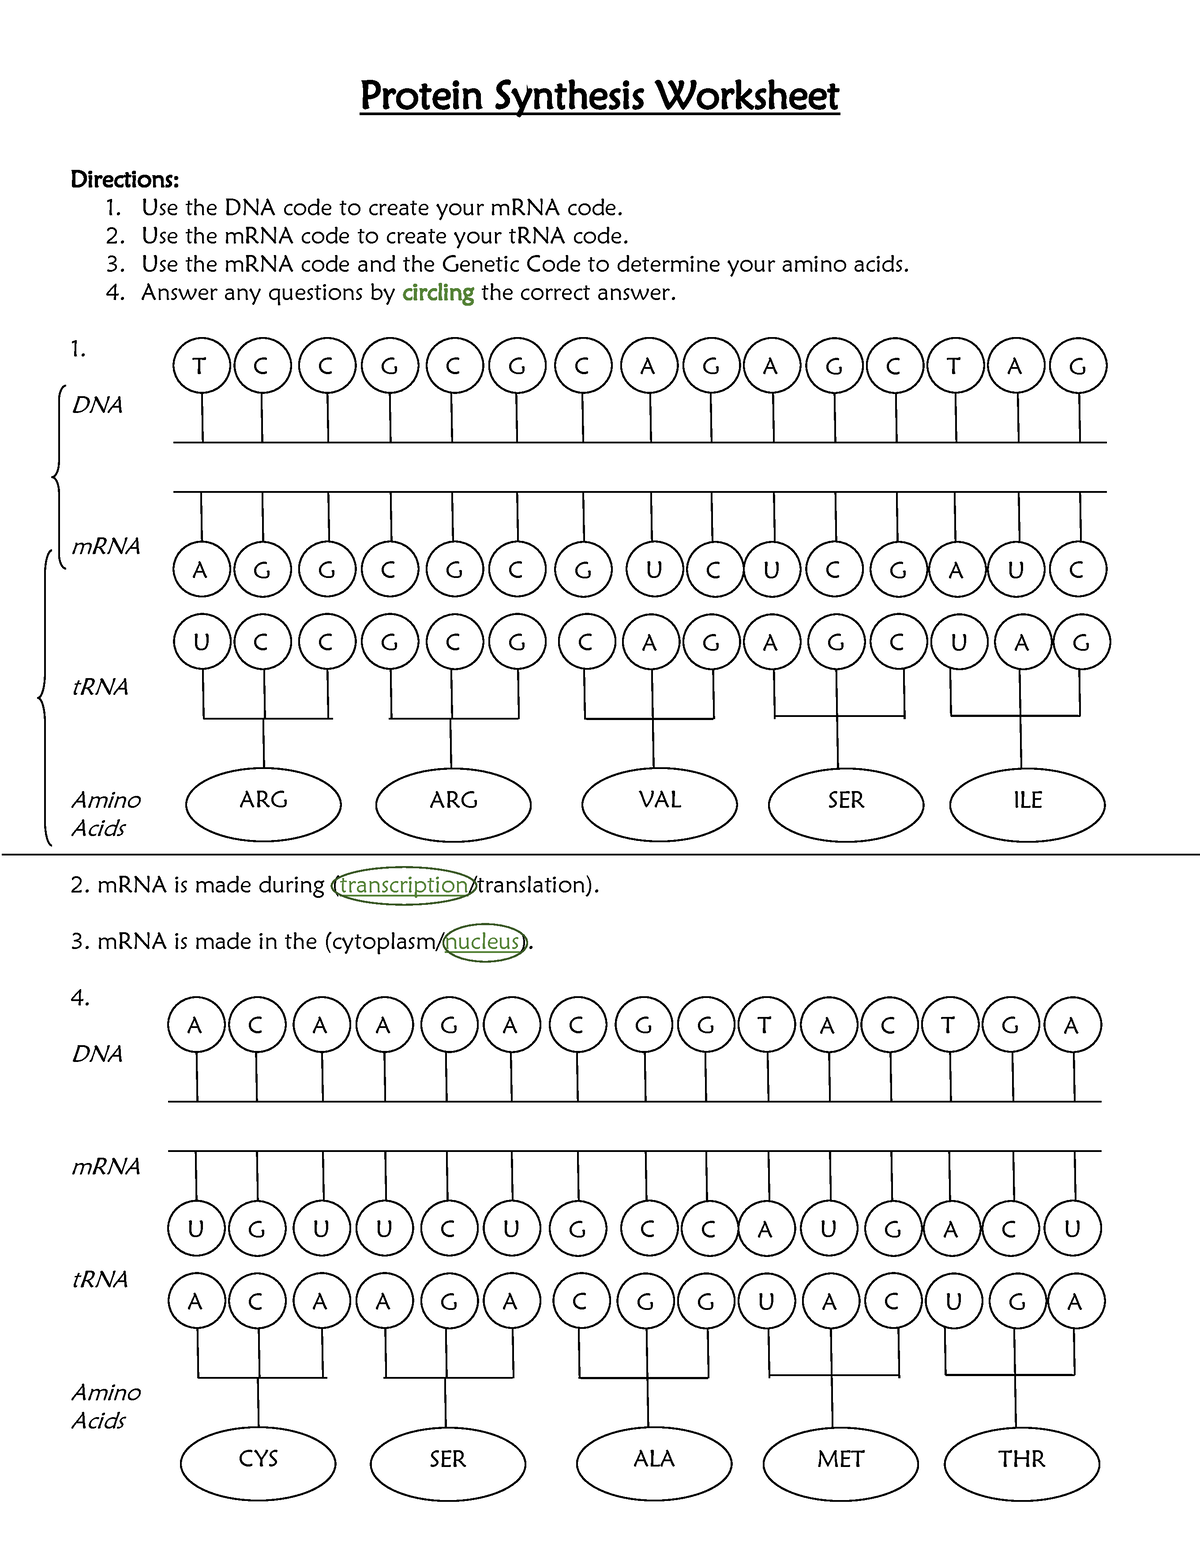 protein-synthesis-worksheet-and-answer-key-protein-synthesis-worksheet-directions-1-use-the